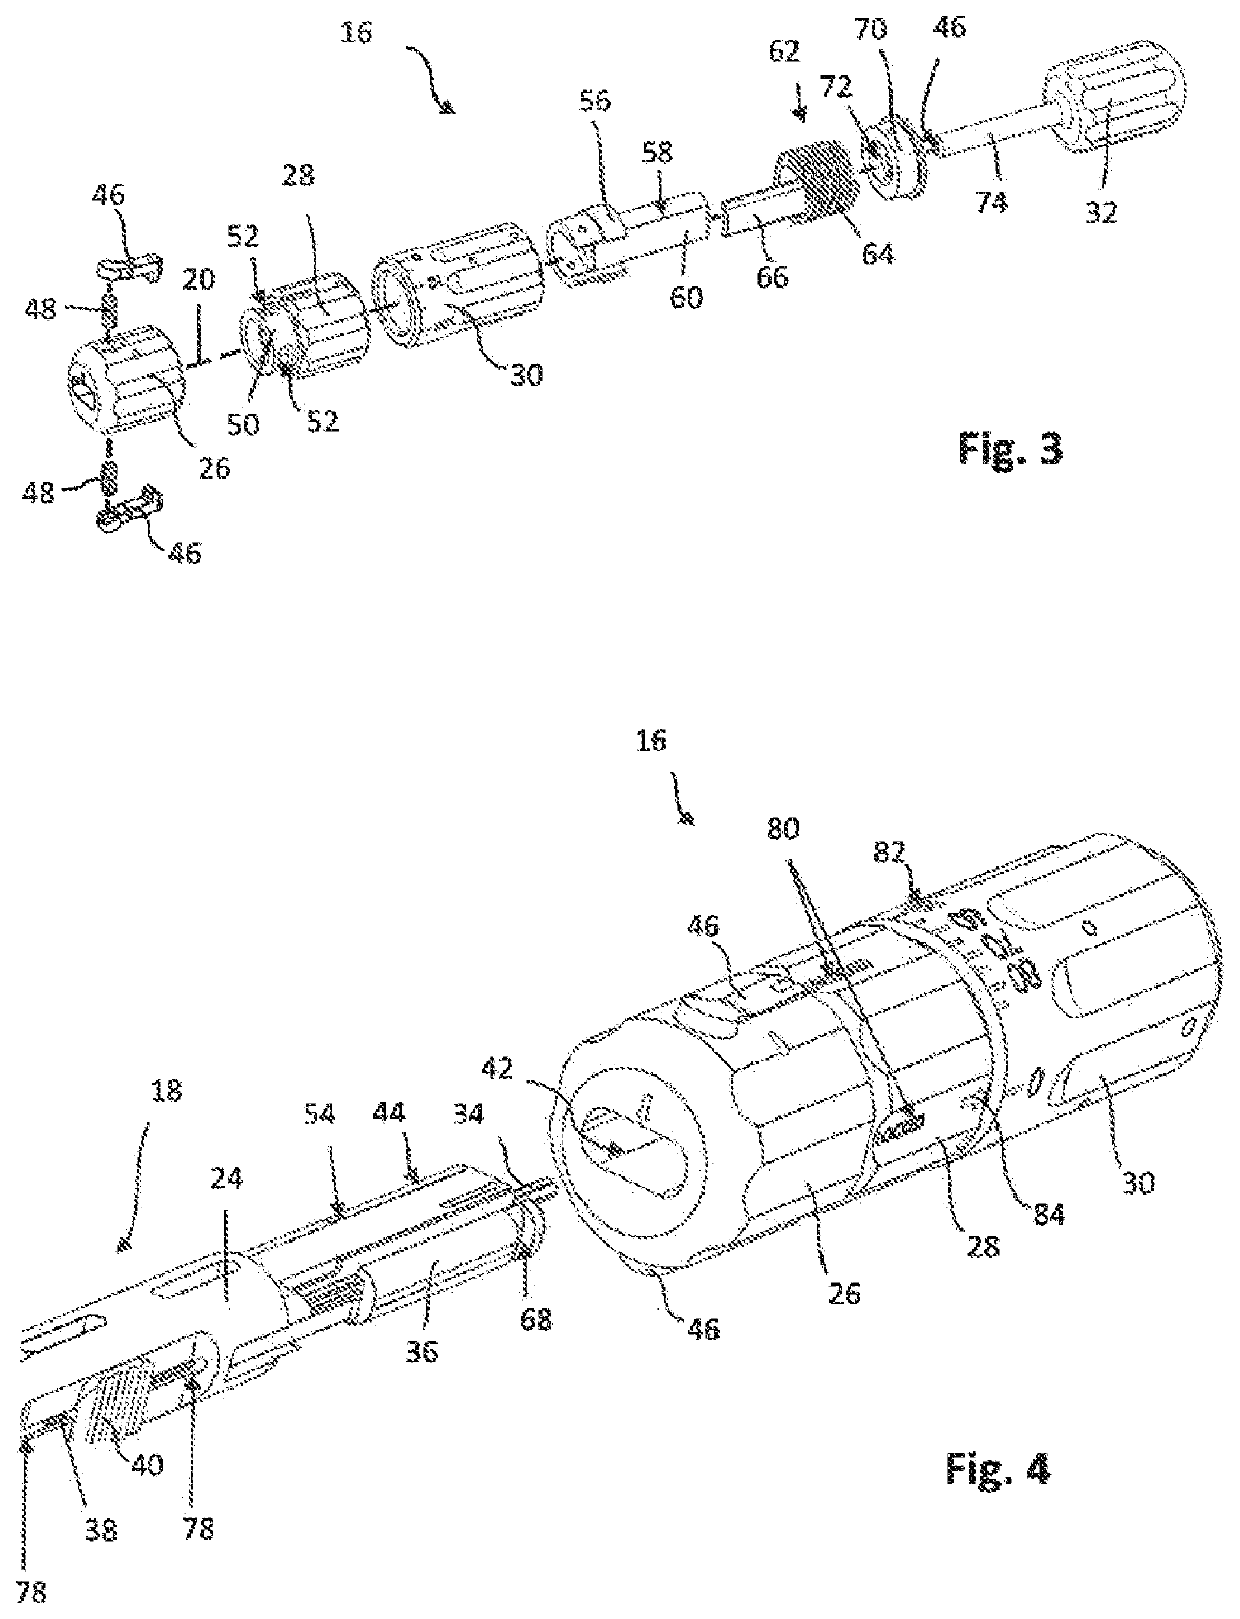 Cage and positioning instrument for a cage positioning system